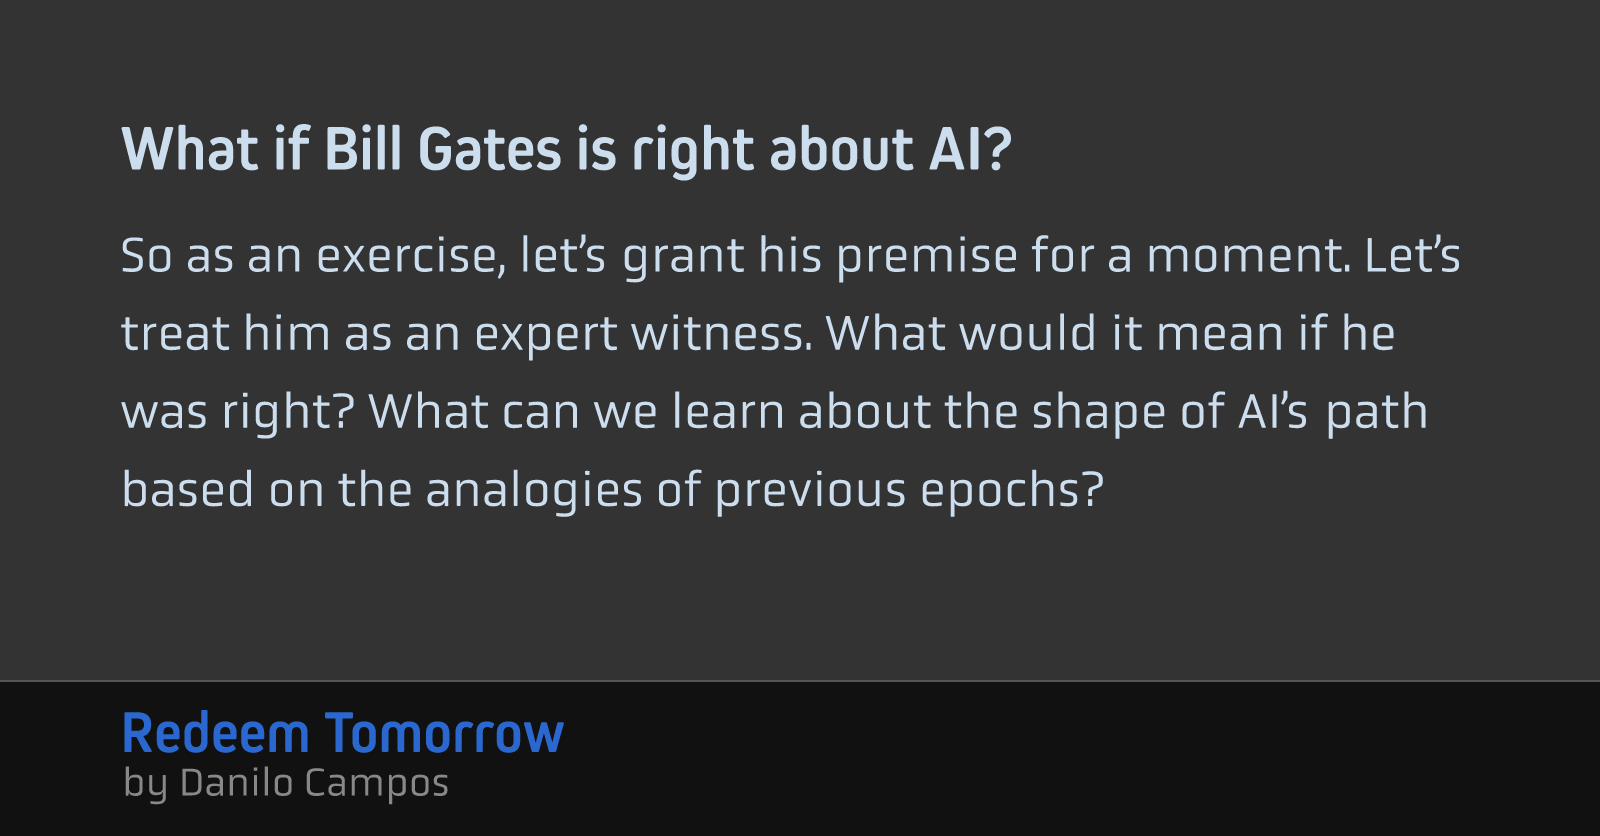 What if Bill Gates is right about AI?